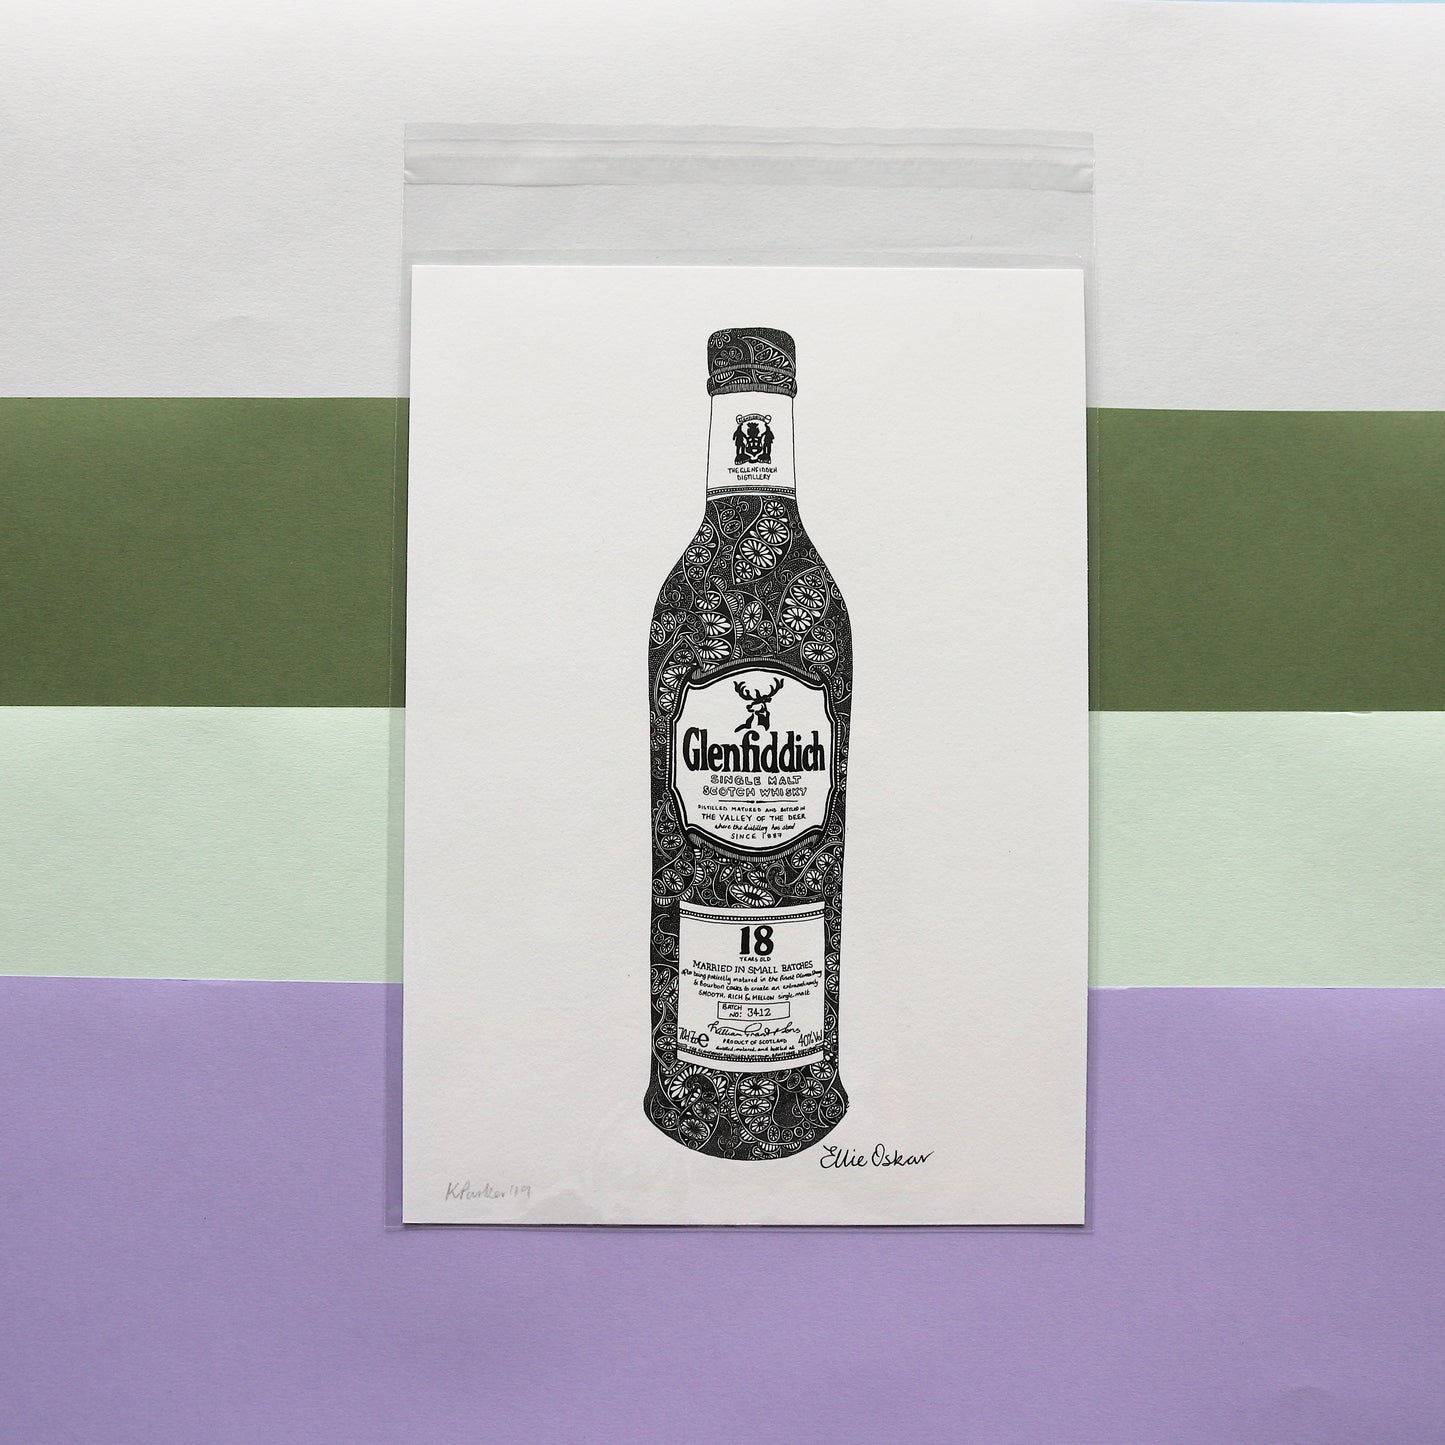 SALE - A3 Glenfiddich Print **Old Branding** - 2 available